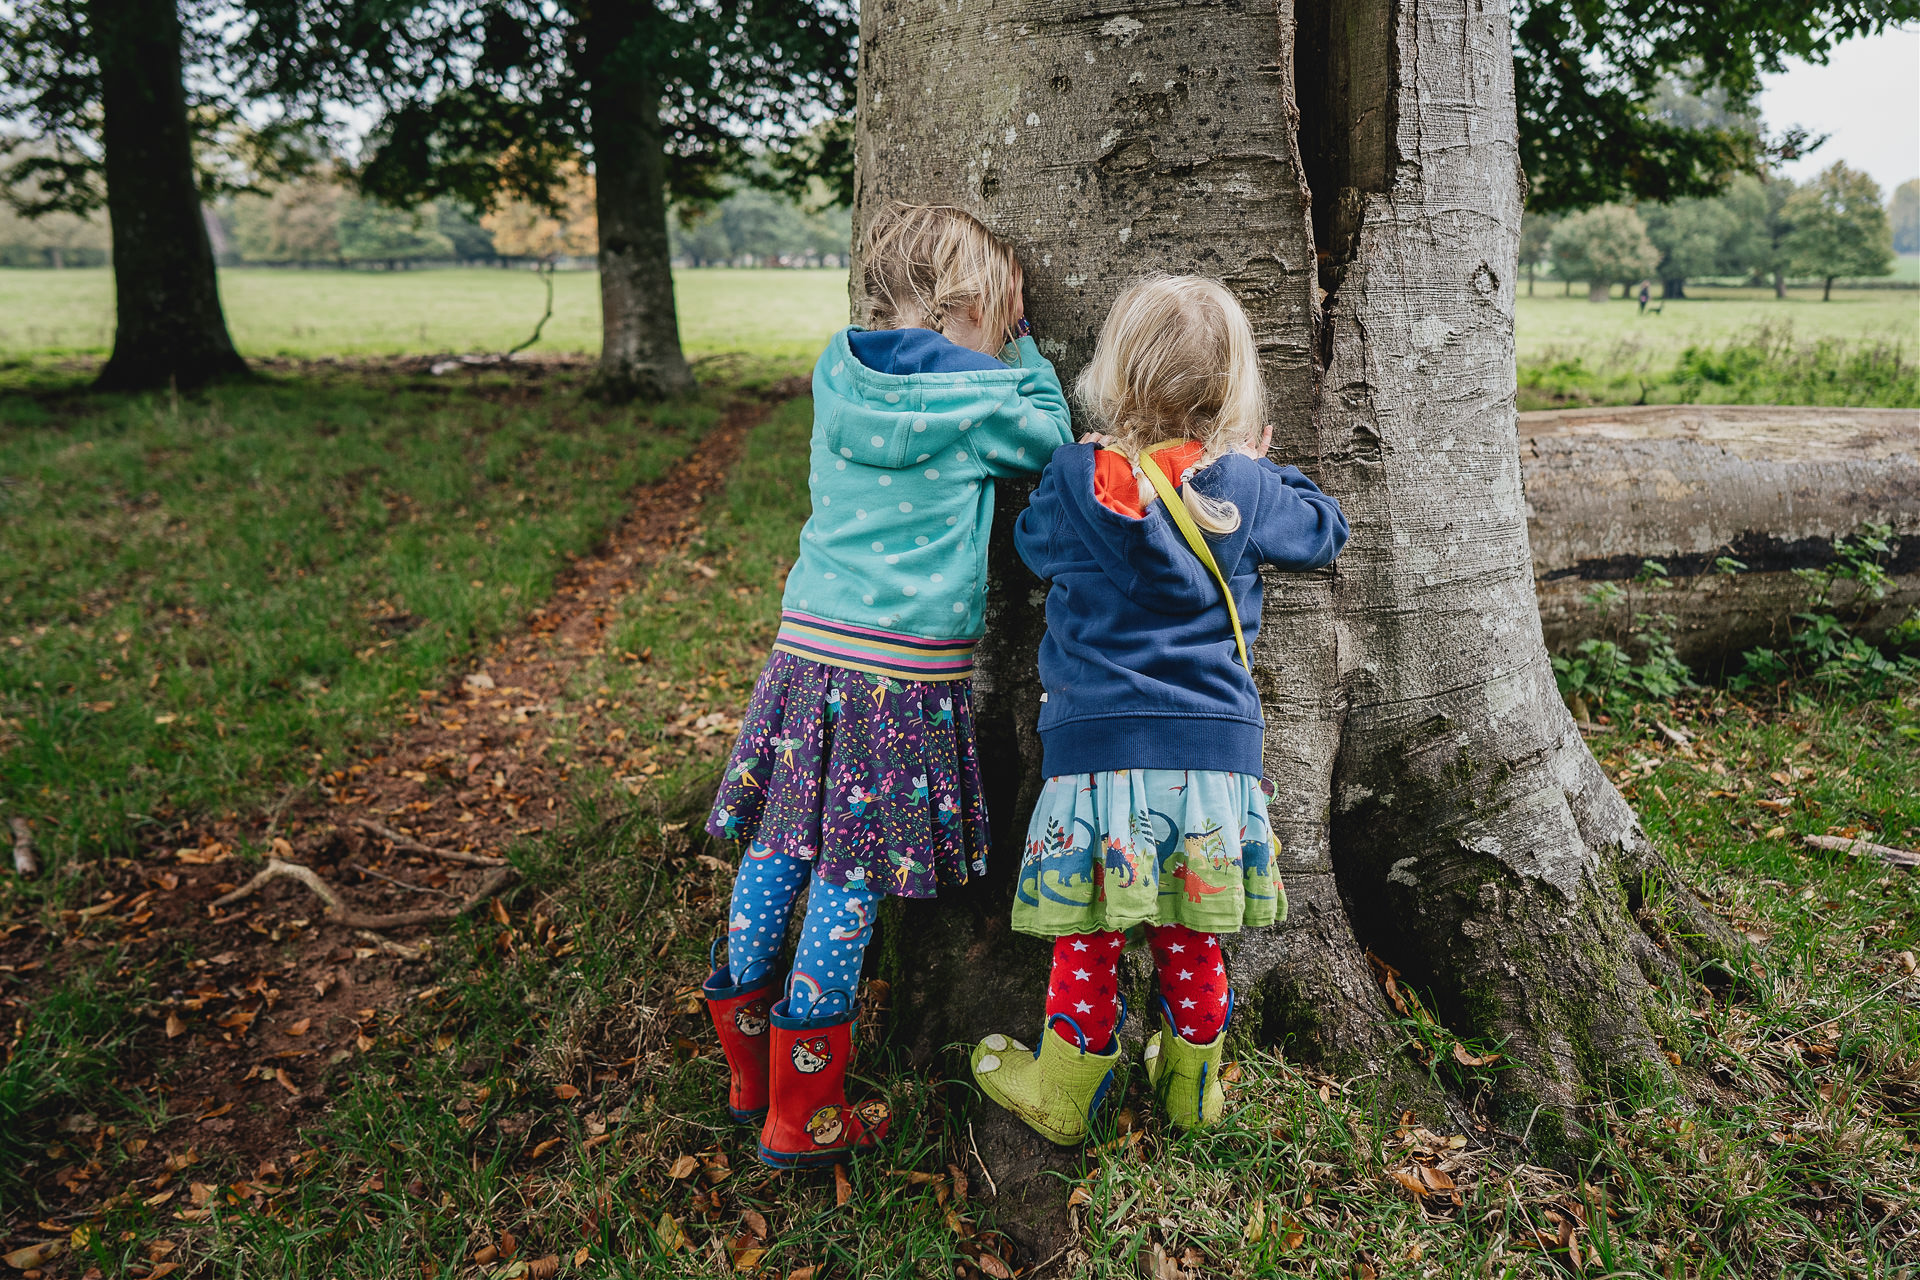 Two young girls playing hide and seek by a tree